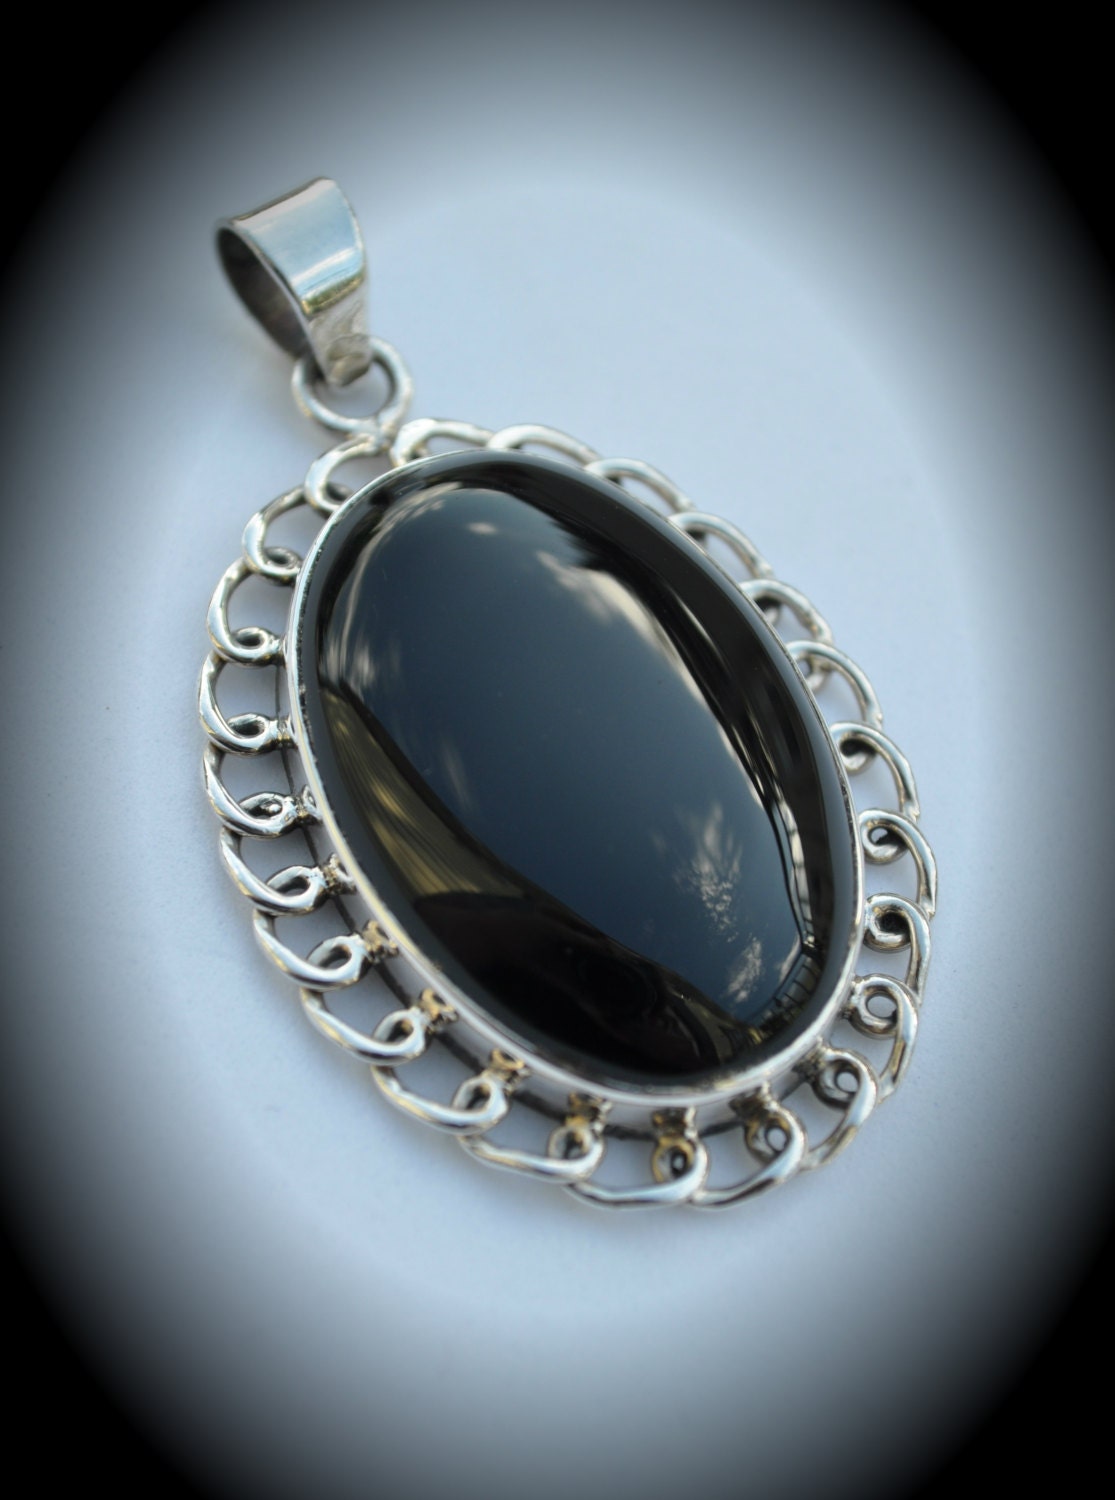 EXCLUSIVE and Large Sterling Silver Pinch Bail for Pendant